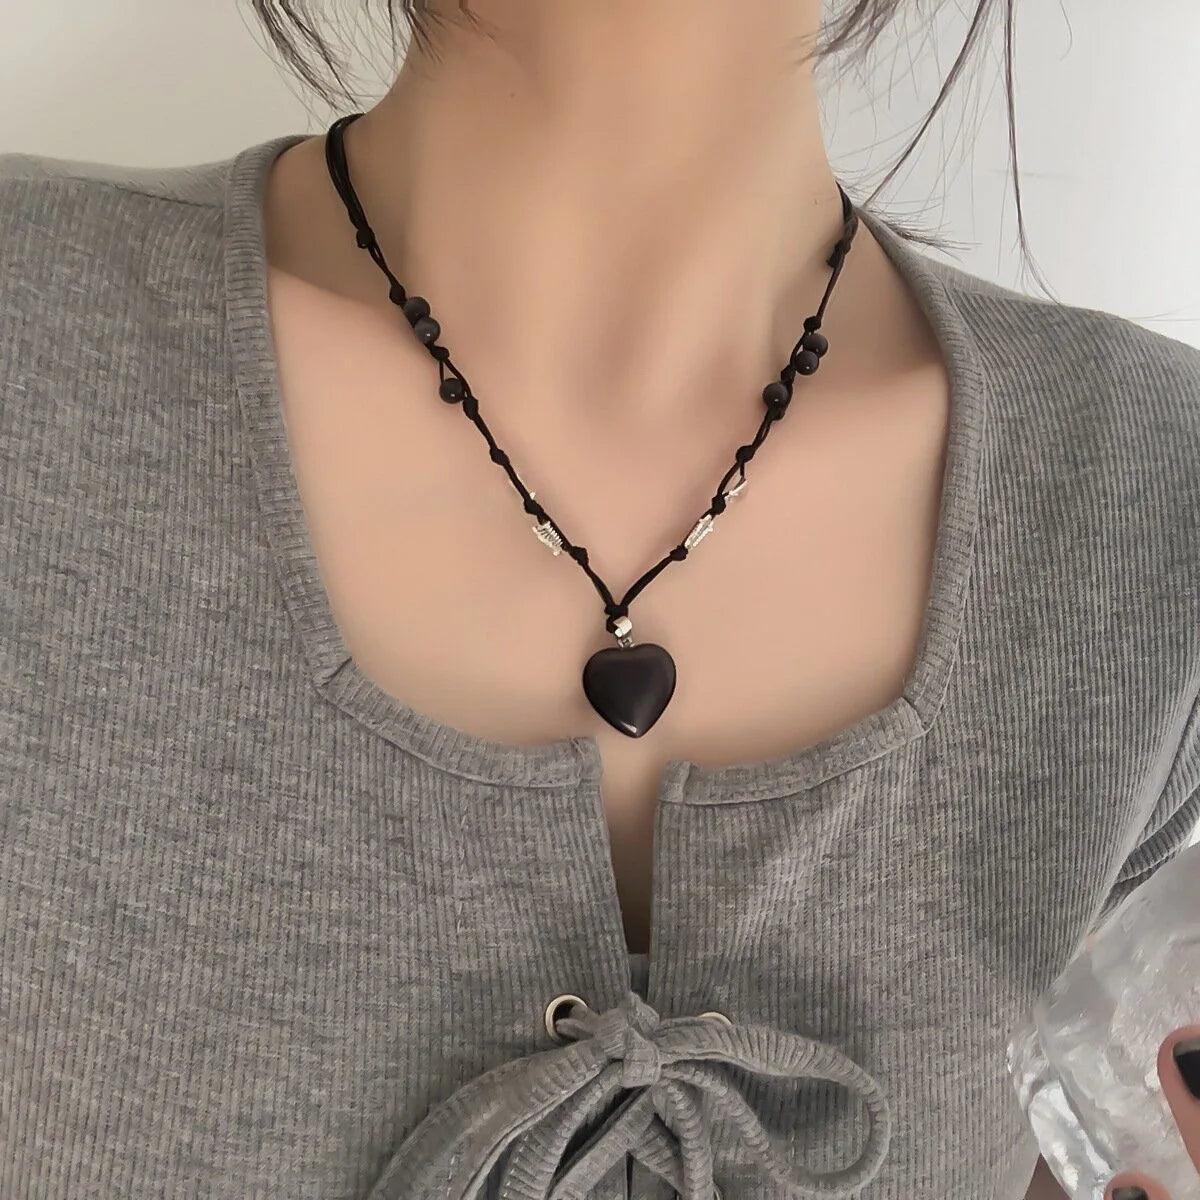 Women Choker Necklace Double Layer Beads Necklace Gift for Friend Silver Color Geometric Necklace Wholesale Collar Jewelry-Dollar Bargains Online Shopping Australia